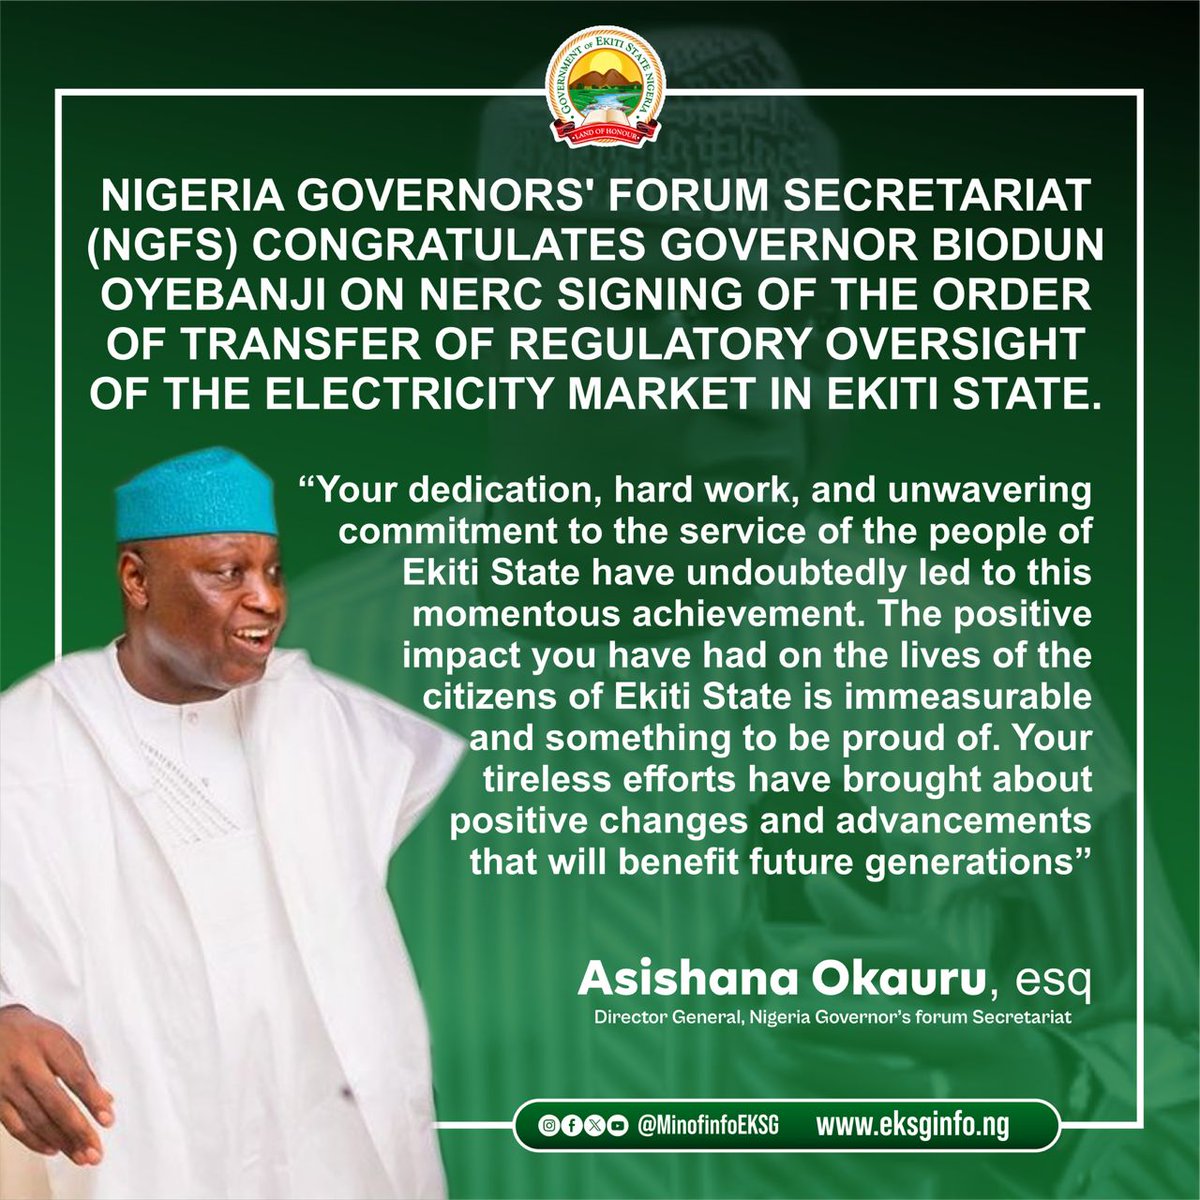 The Nigeria Governors' Forum Secretariat (NGFS) congratulates Governor Biodun Oyebanji on the NERC signing of the Order of Transfer of Regulatory Oversight of the electricity market in Ekiti State.